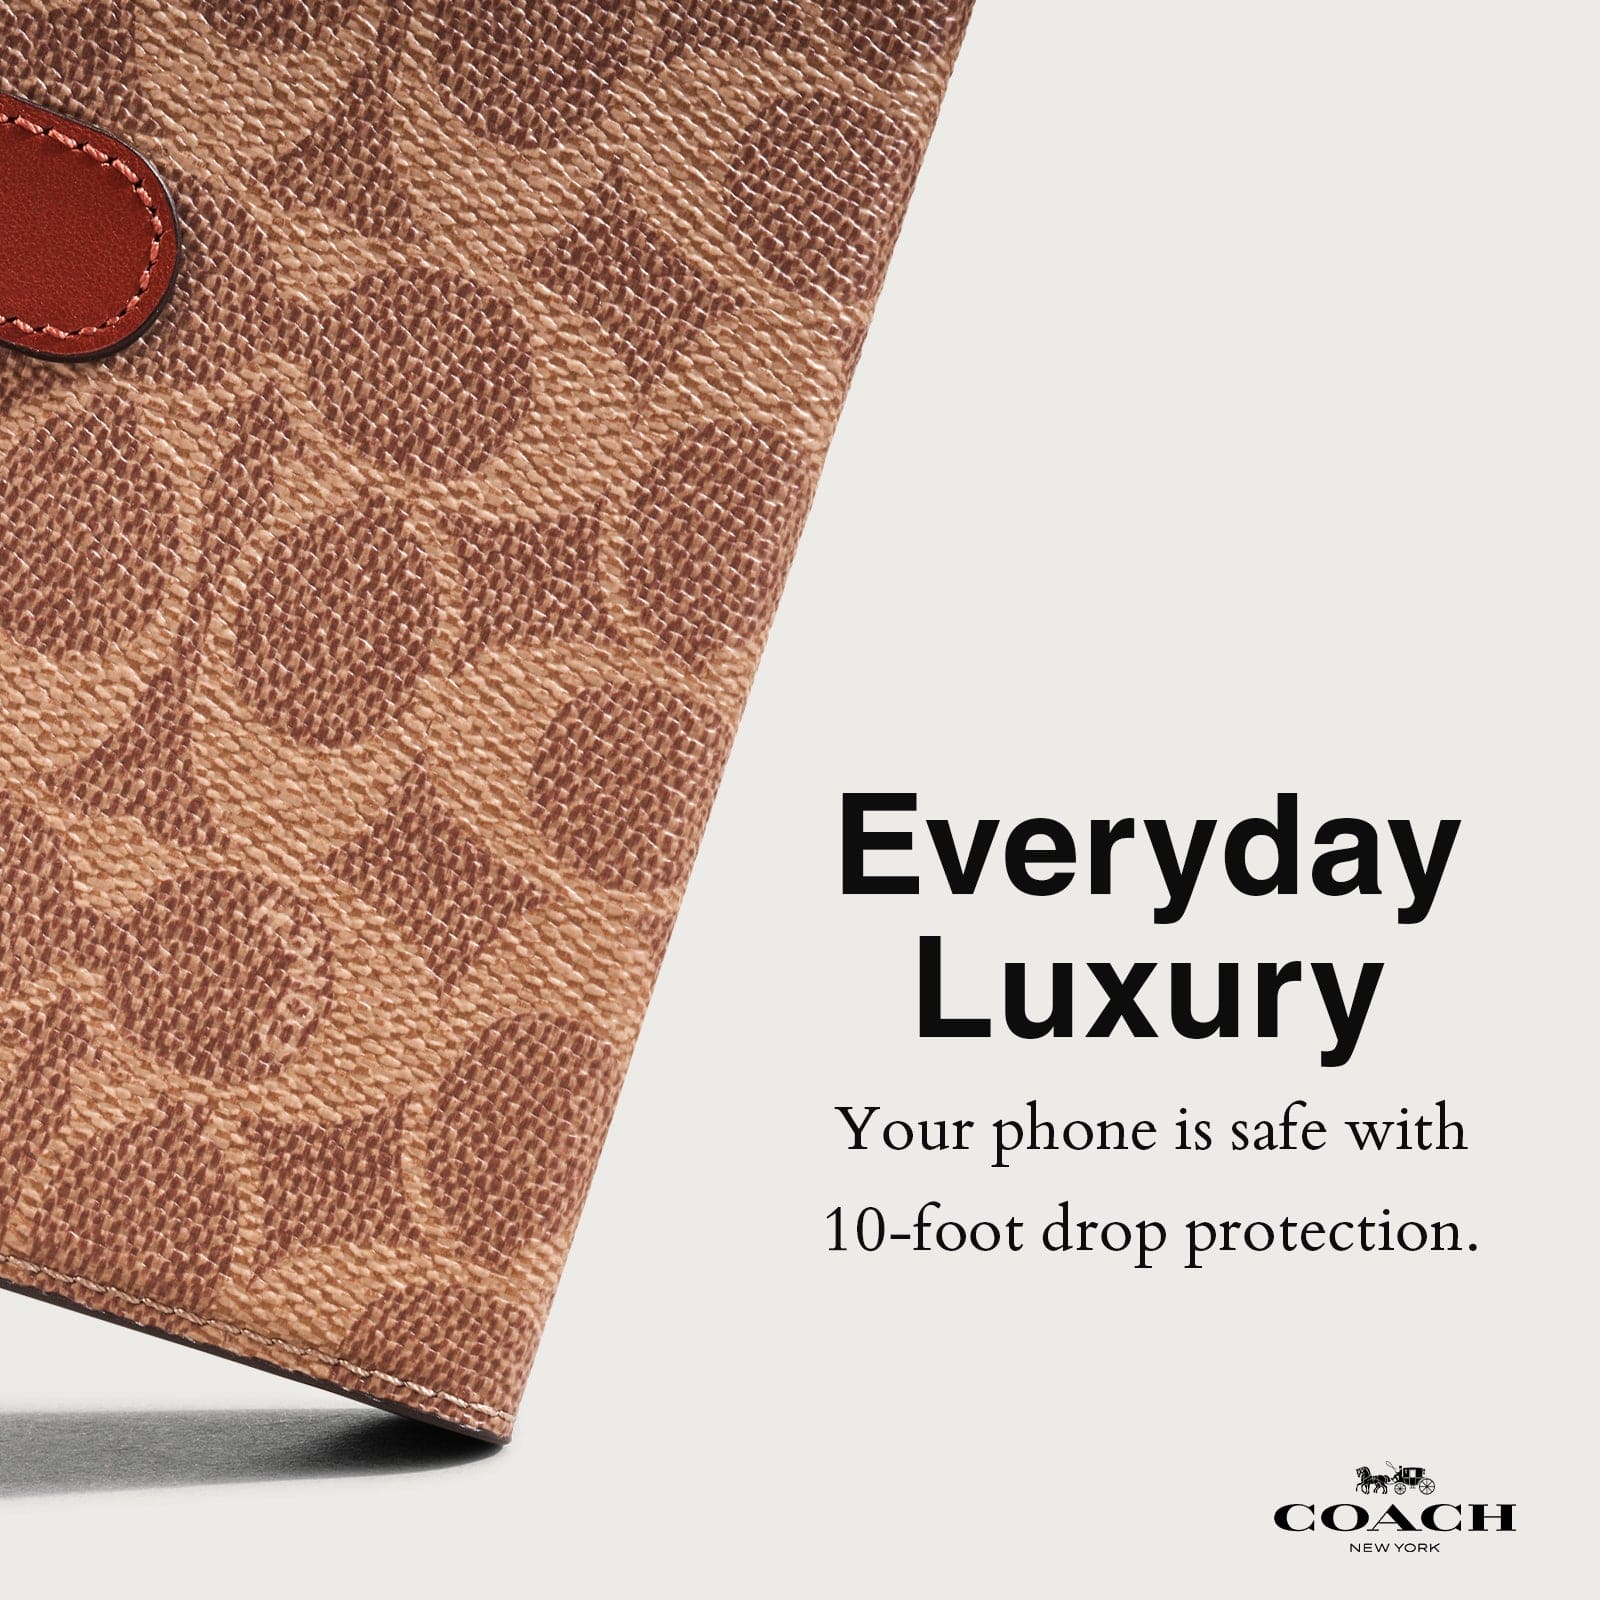 EVERYDAY LUXURY. YOUR PHONE IS SAFE WITH 10 FOOT DROP PROTECTION